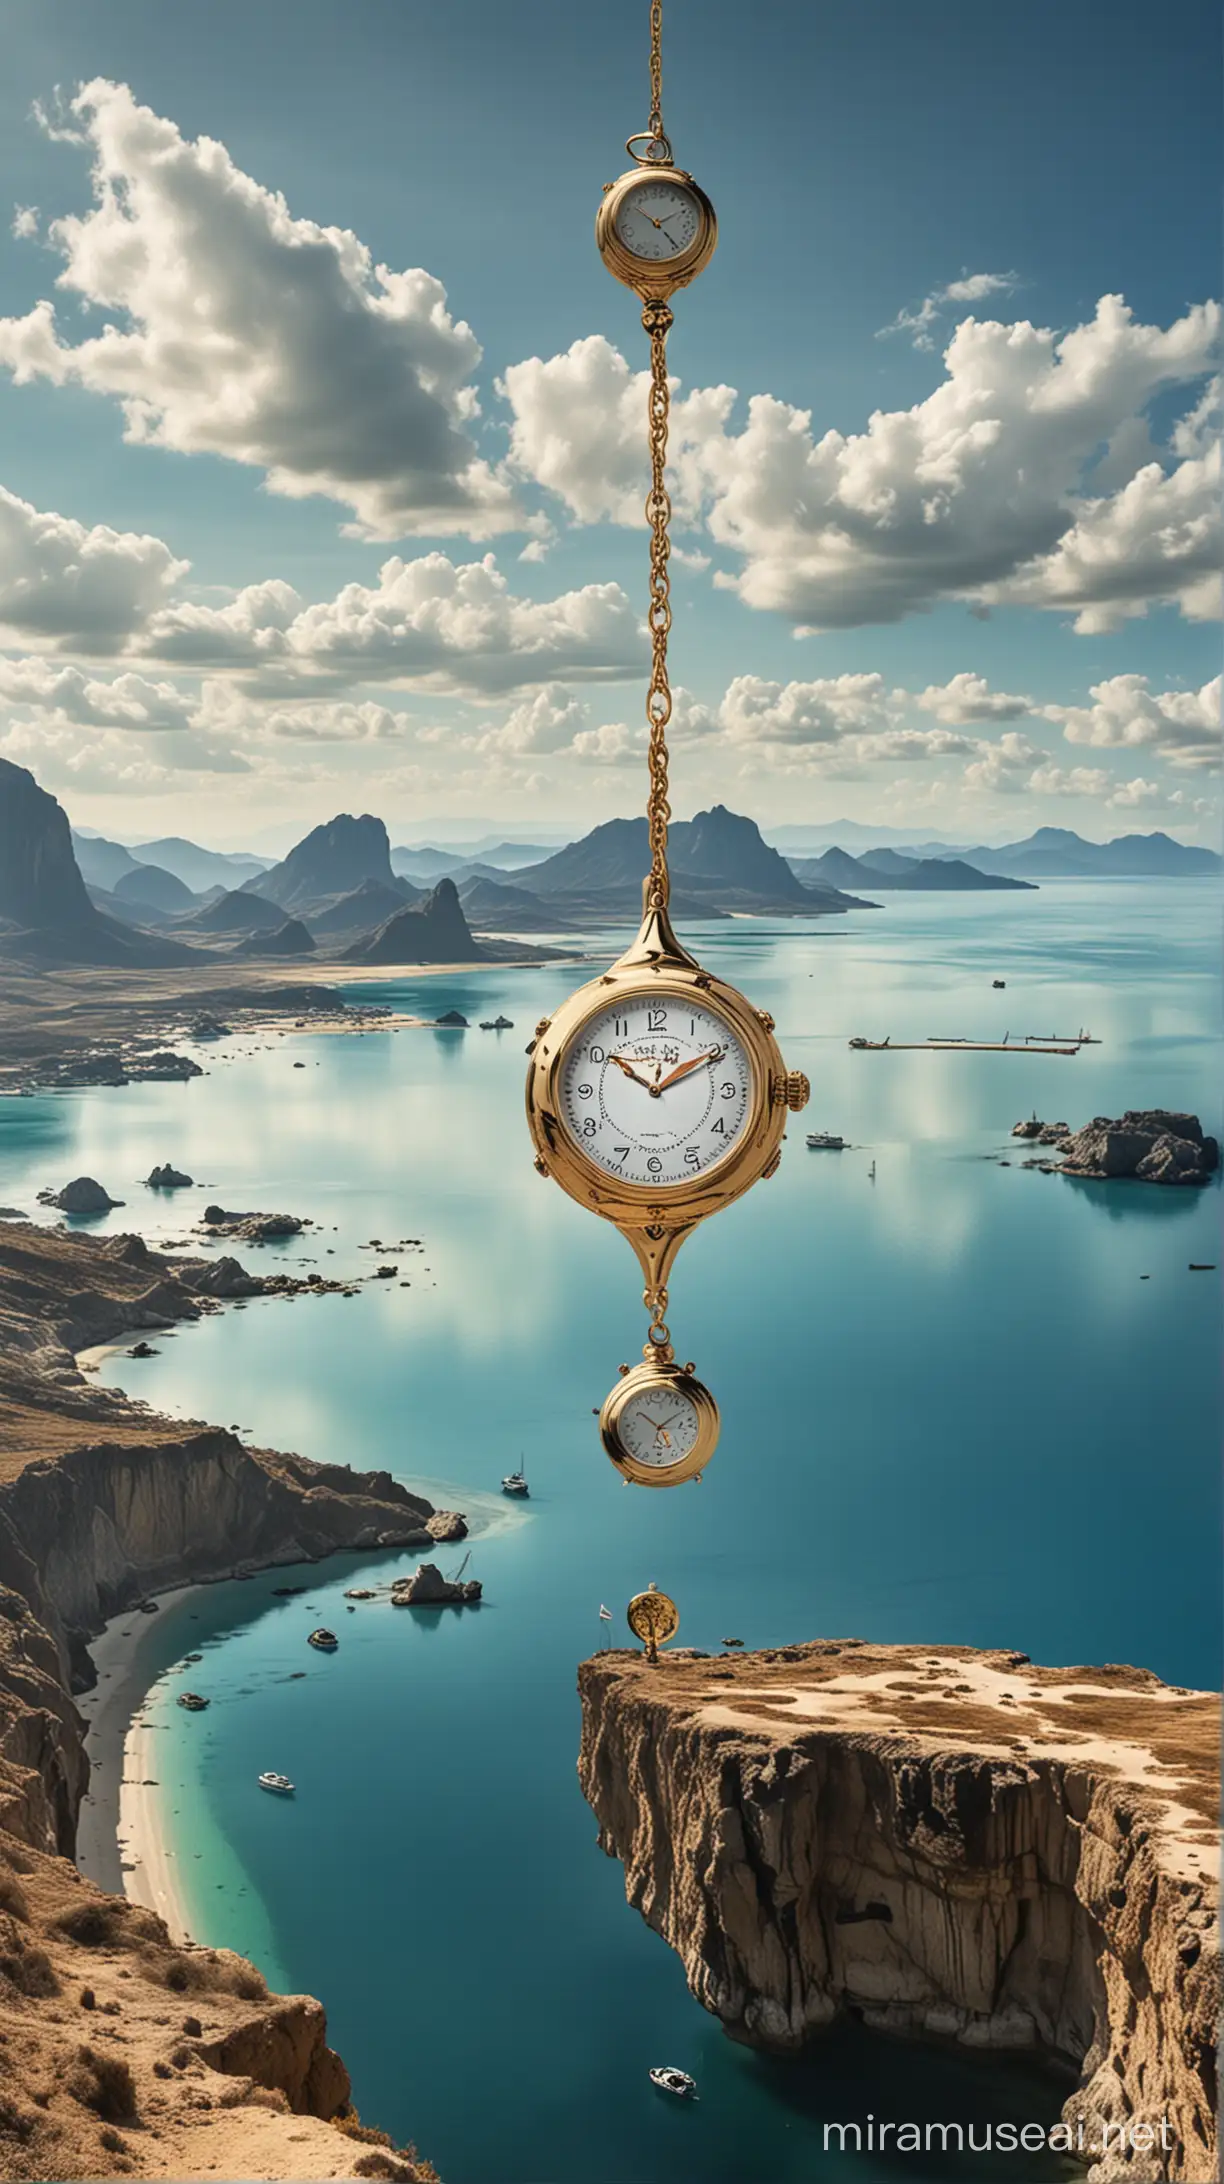 dali surreal watch floating on islands in the air